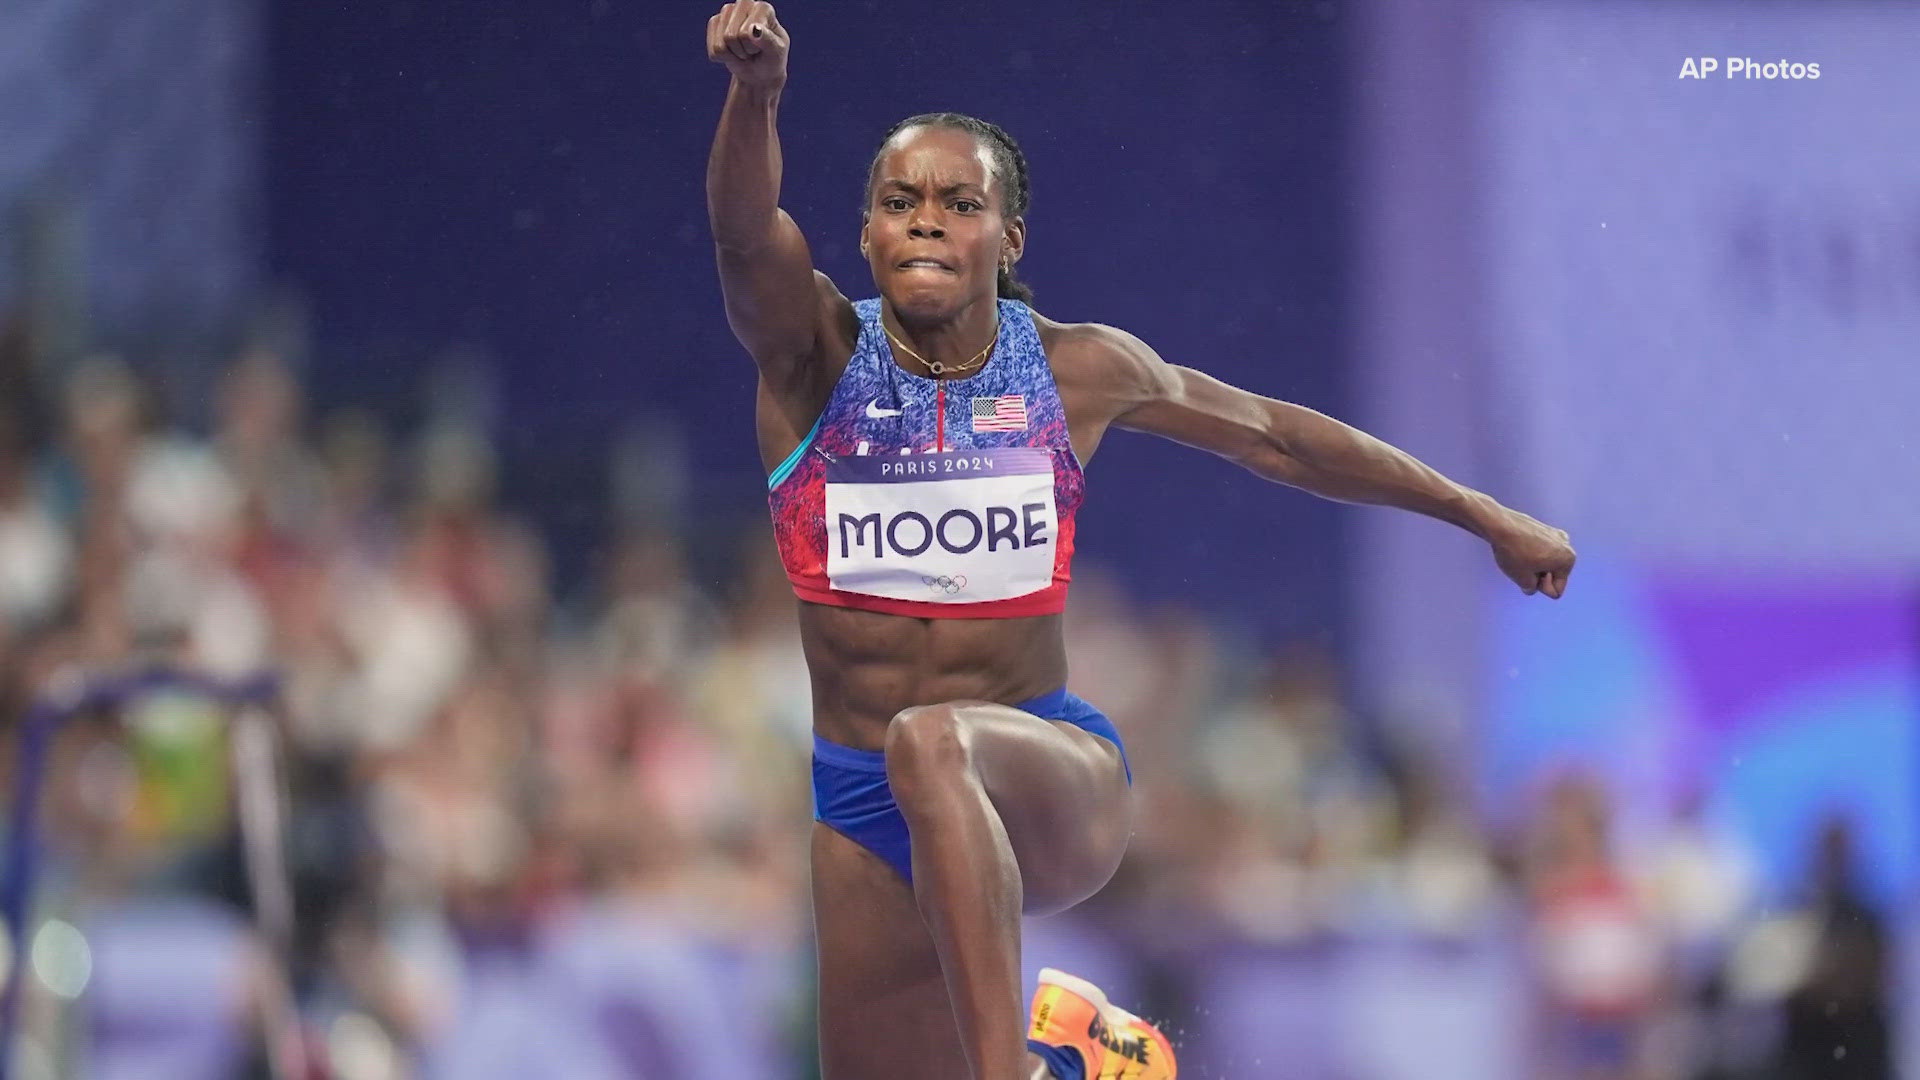 Moore made history in Paris by becoming the first U.S. woman to qualify for both the Triple and Long Jump.